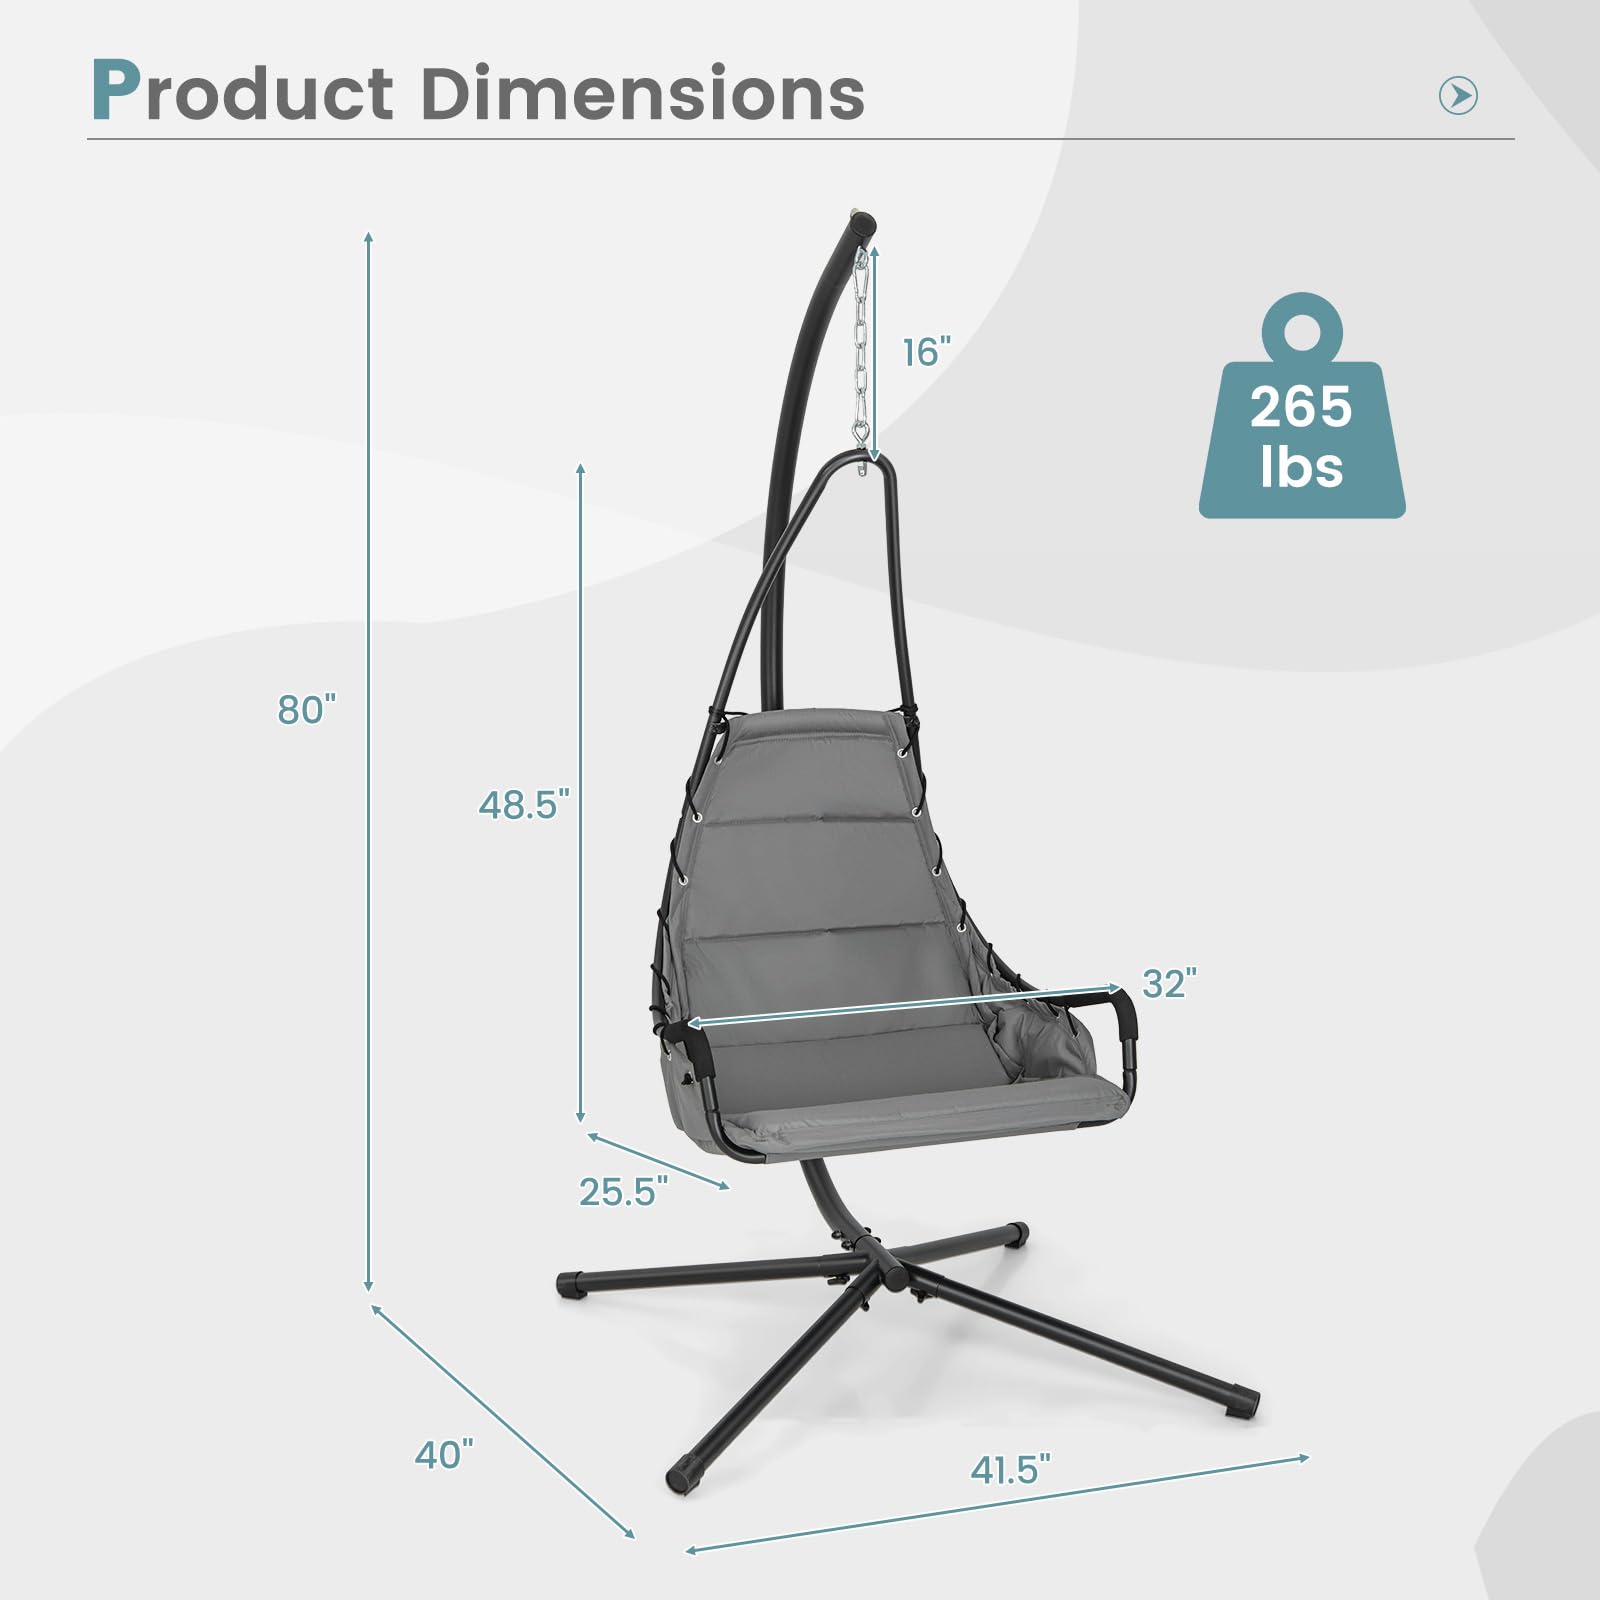 Giantex Hanging Chair with Stand